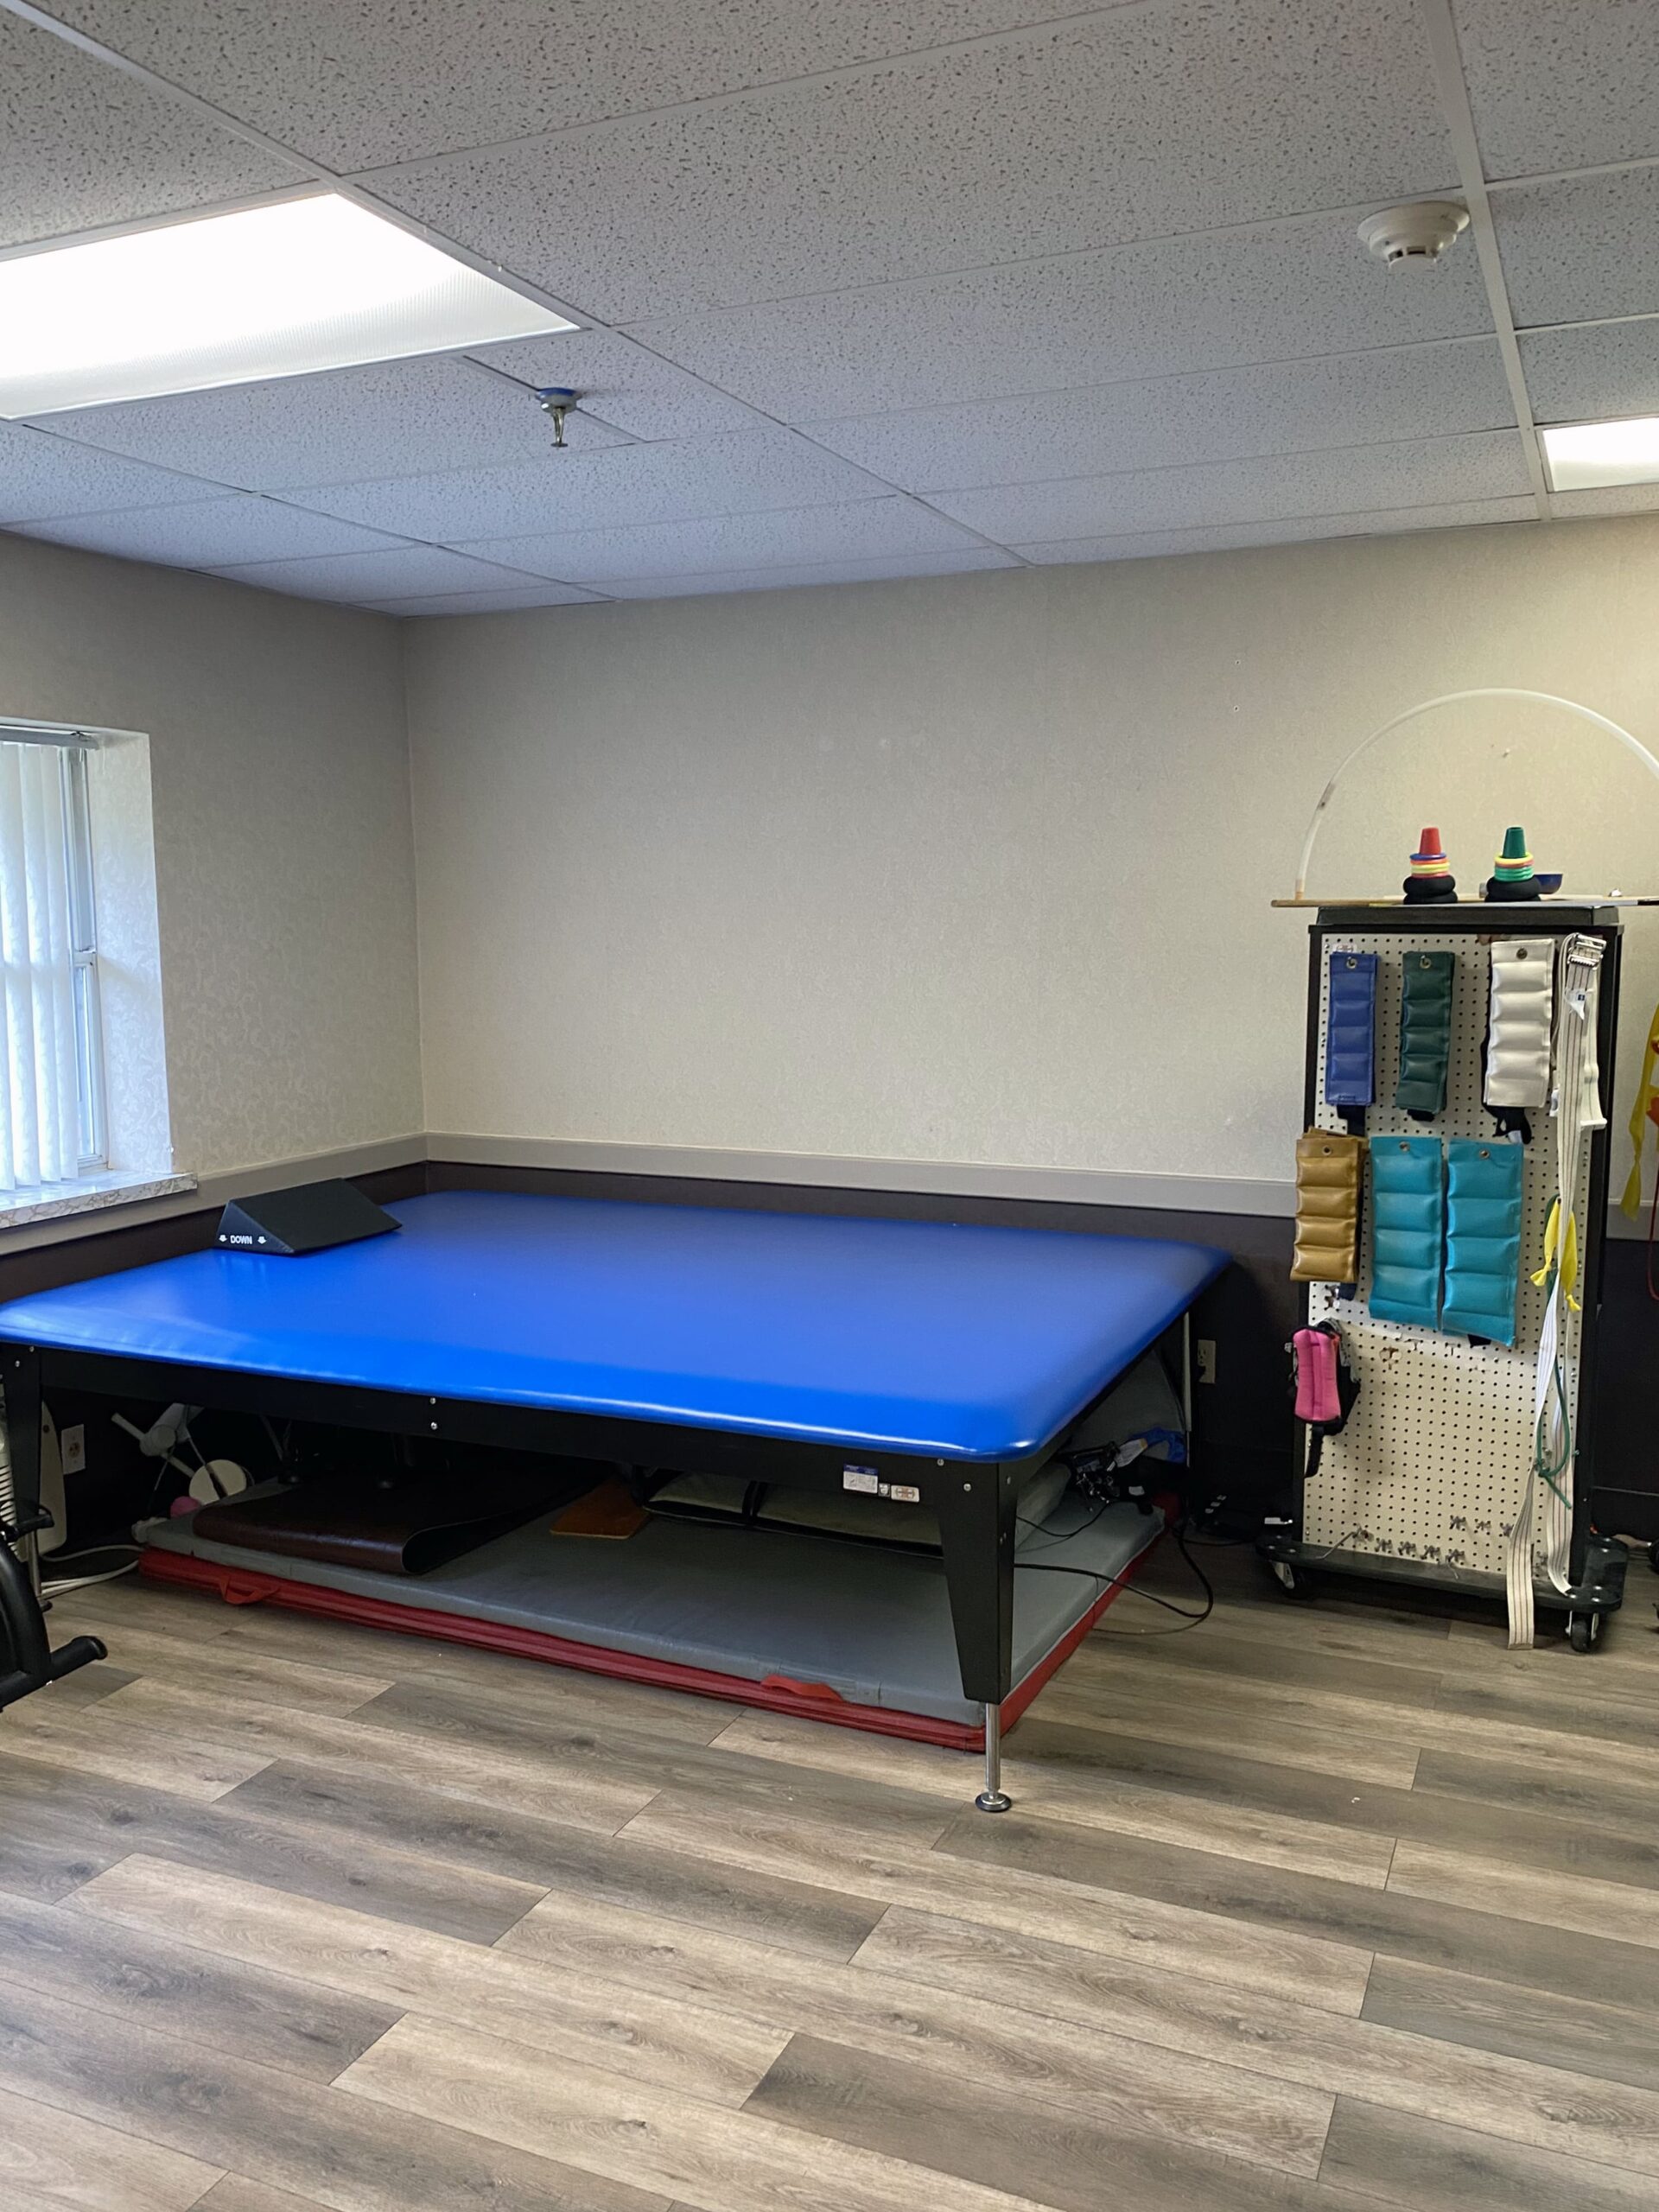 Brickyard Healthcare Sycamore Village Care Center physical therapy equipment